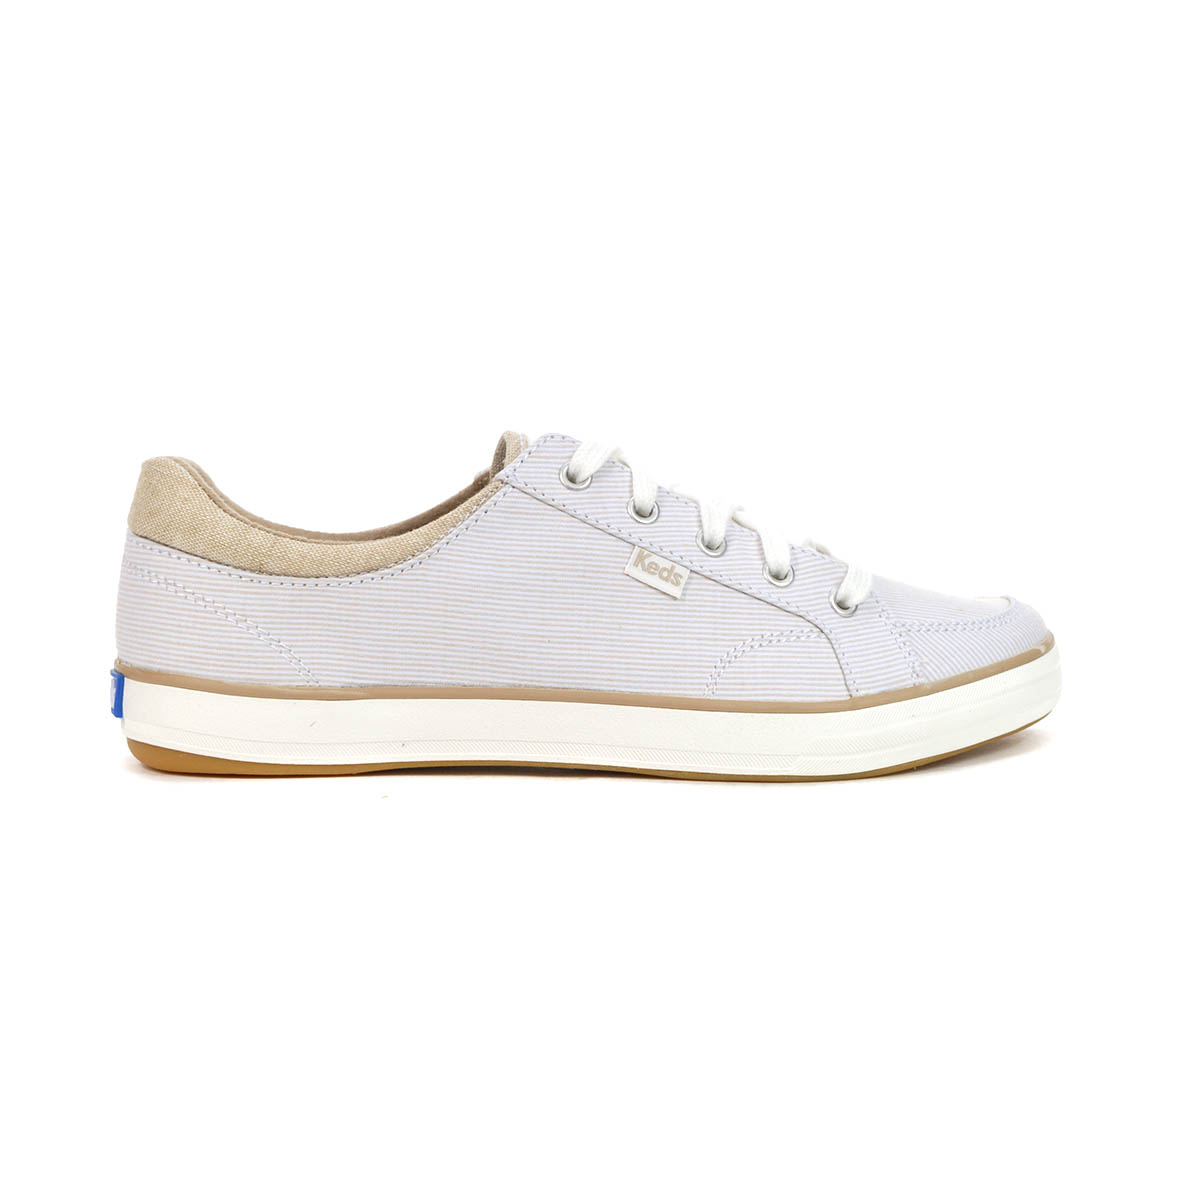 Keds Center II Beige Chambray Striped Sneakers WF65937 